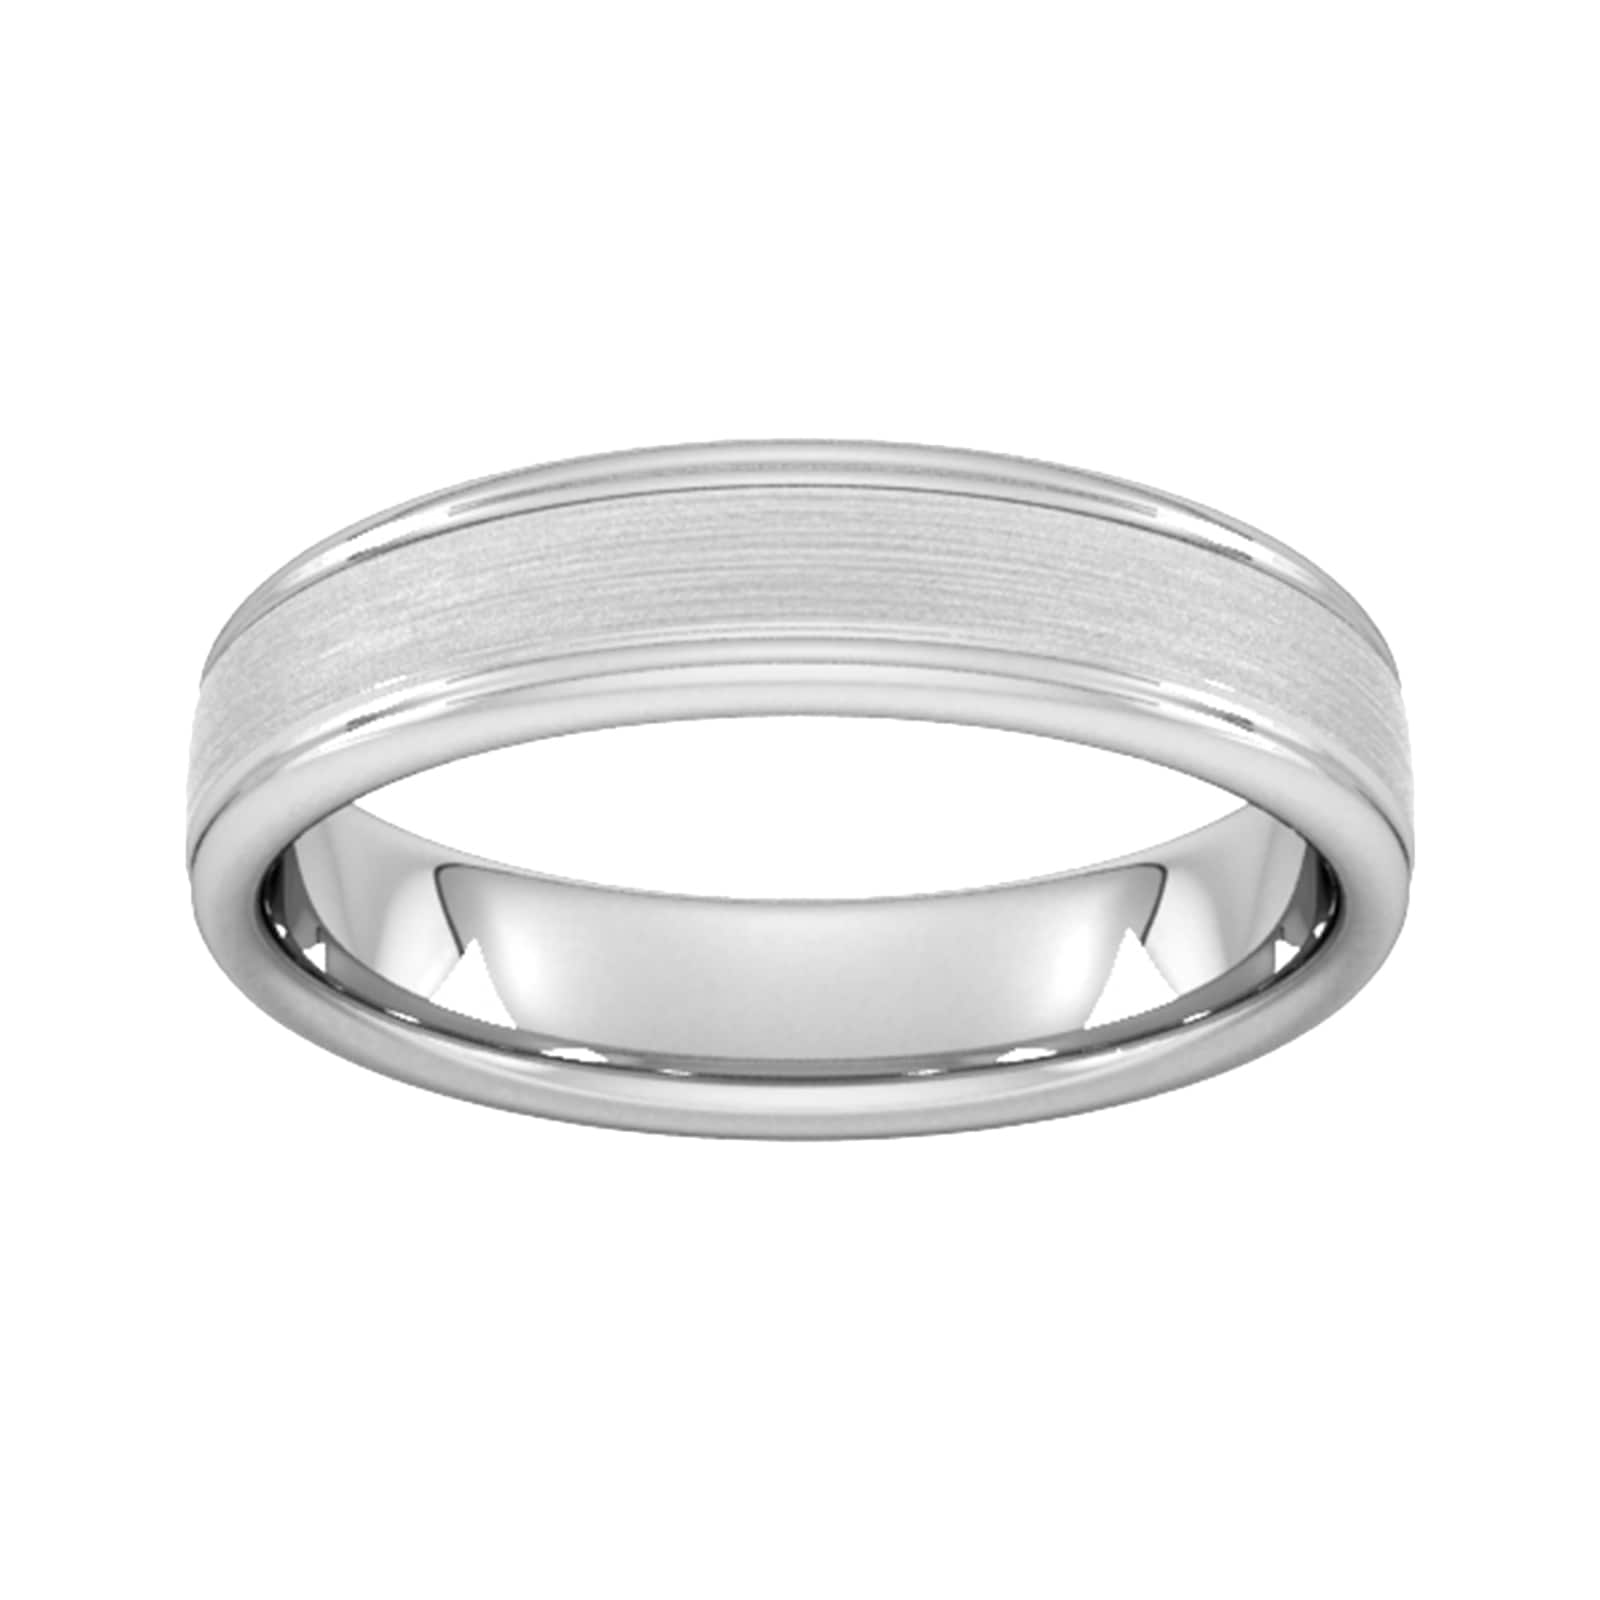 5mm Slight Court Extra Heavy Matt Centre With Grooves Wedding Ring In 18 Carat White Gold - Ring Size R